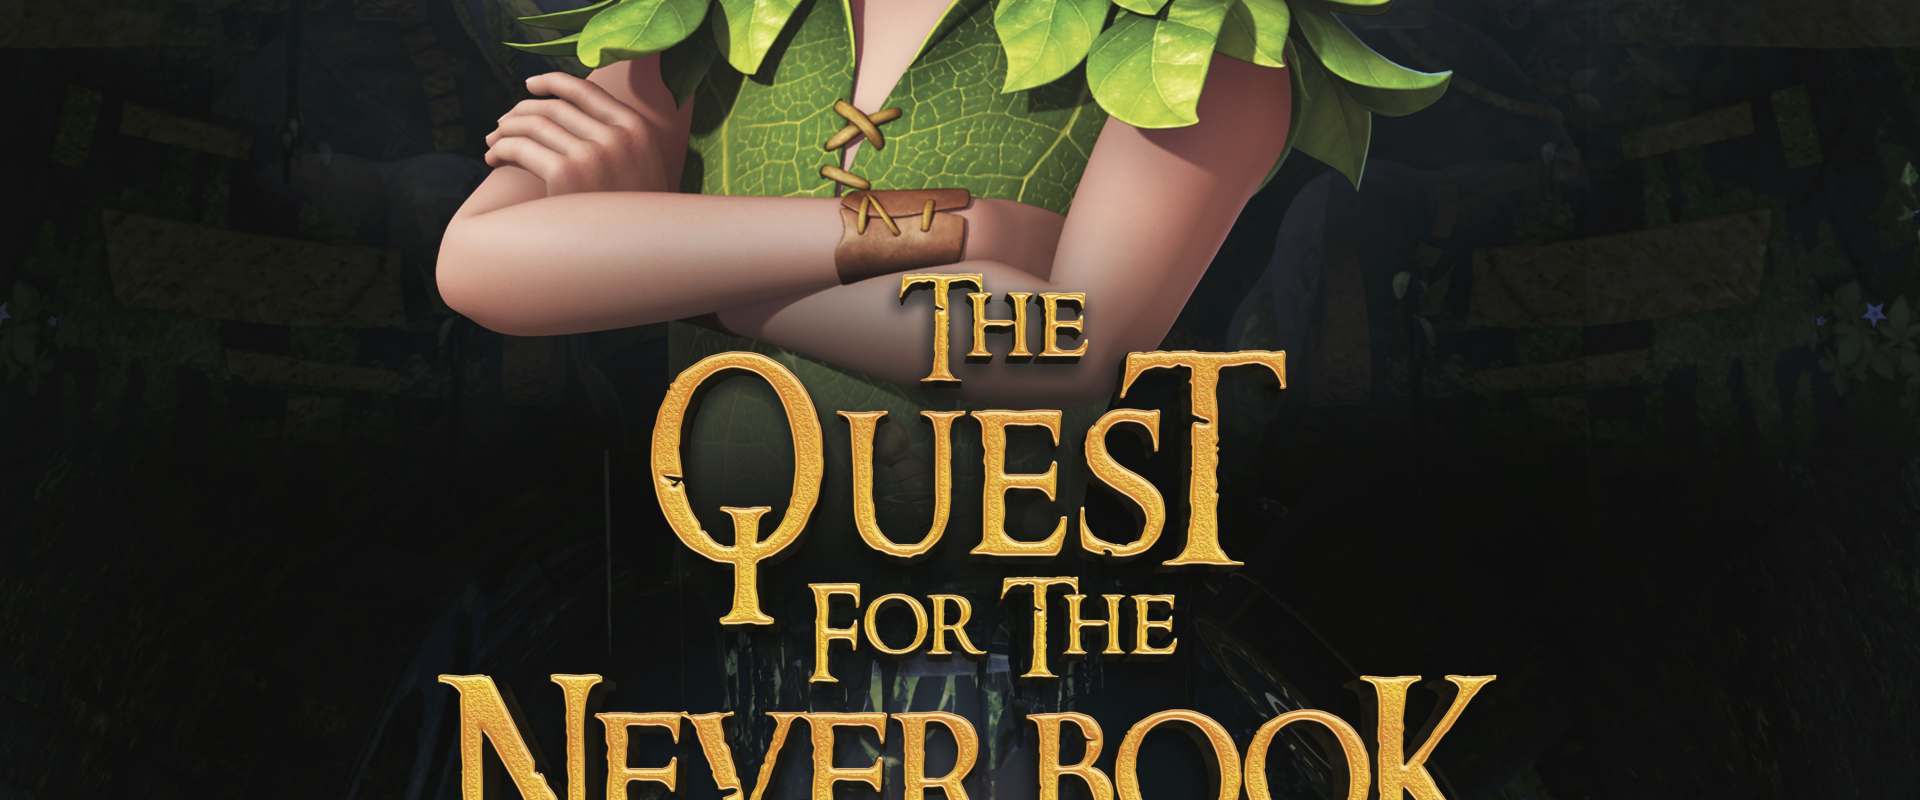 Peter Pan: The Quest for the Never Book background 2